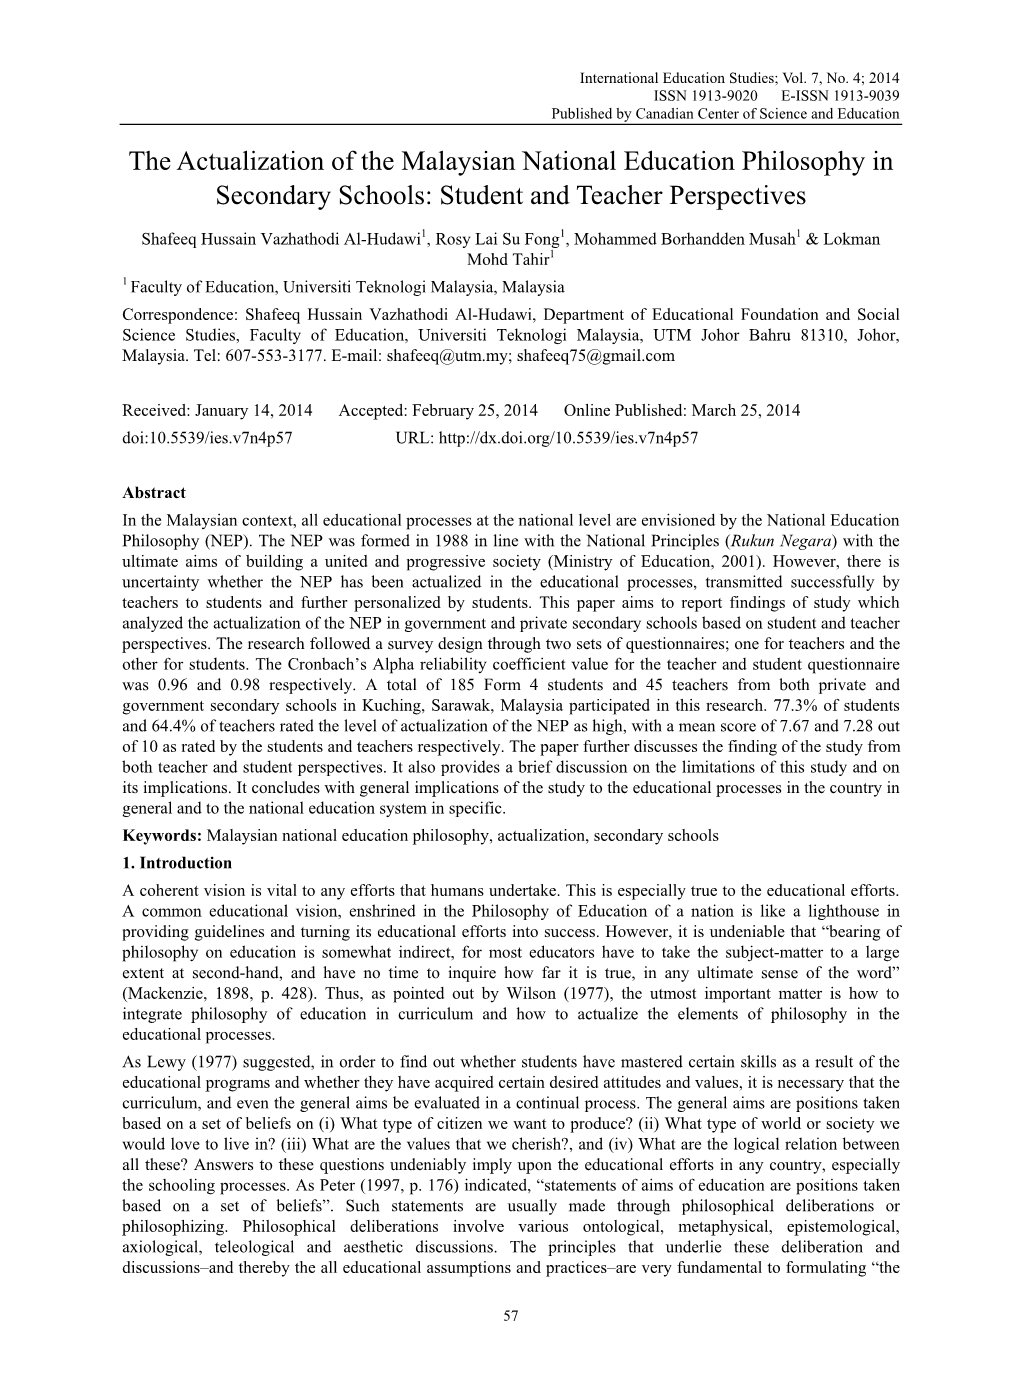 The Actualization of the Malaysian National Education Philosophy in Secondary Schools: Student and Teacher Perspectives